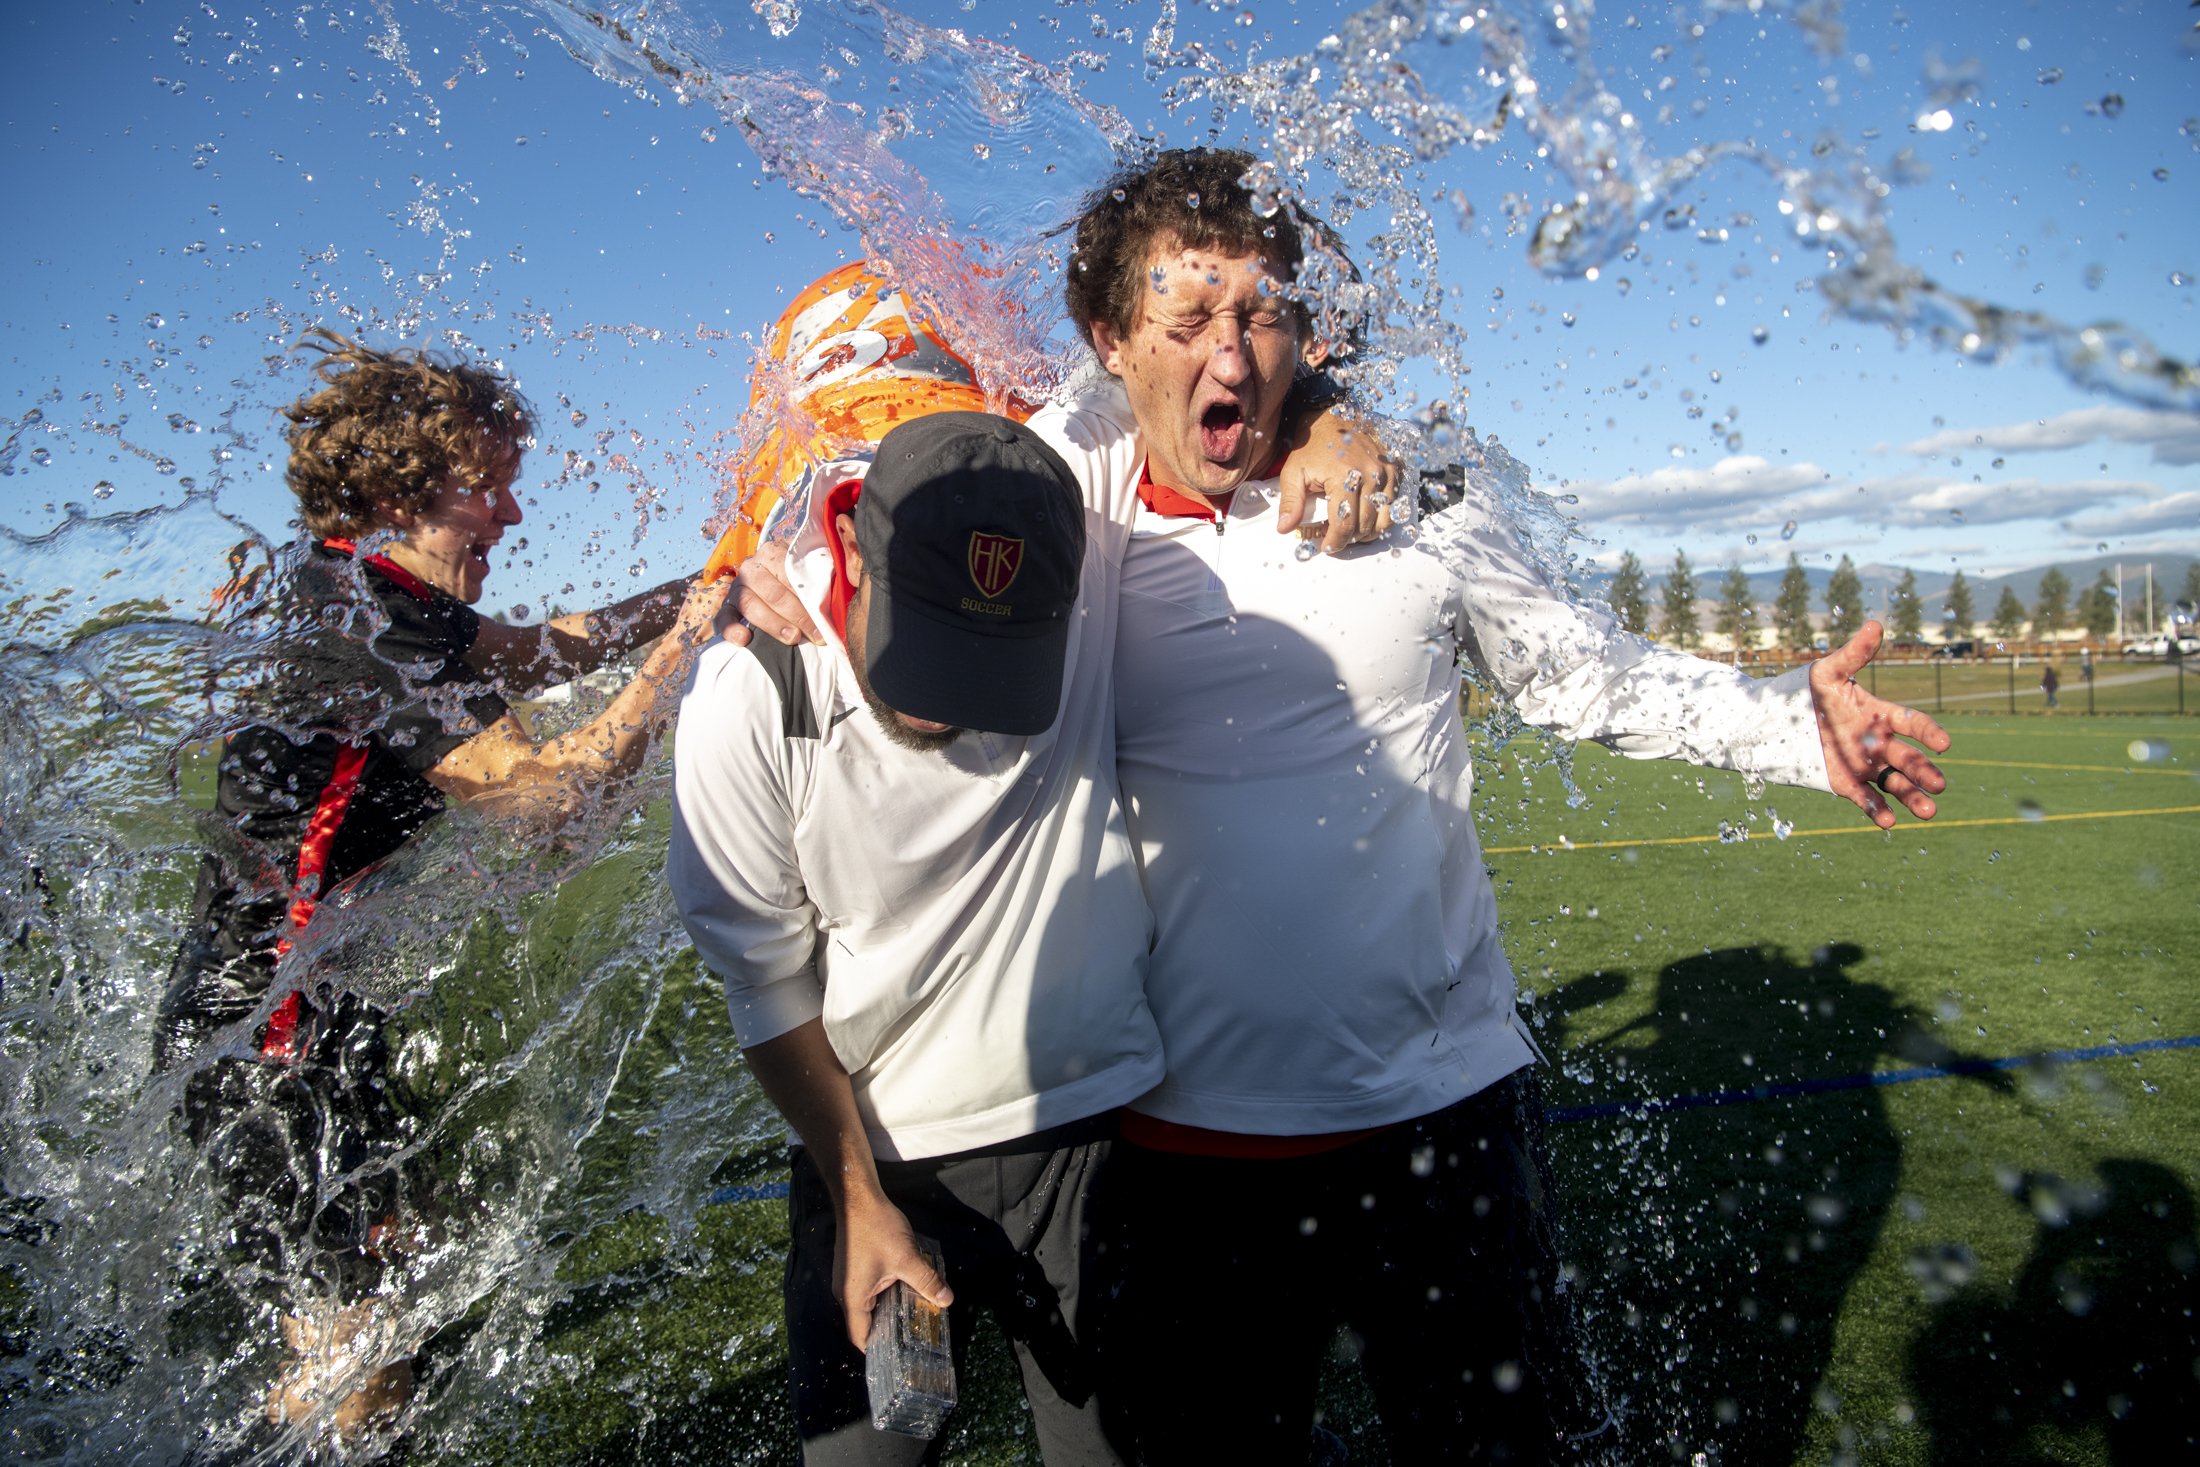  Hellgate’s Lars Thorne-Thomsen drenches the coaches following during the AA soccer state championship match  at Fort Missoula, Saturday, Oct. 30, 2021. The Knights defeated the Wolfpack, 1-0, in overtime to win their third straight title.  